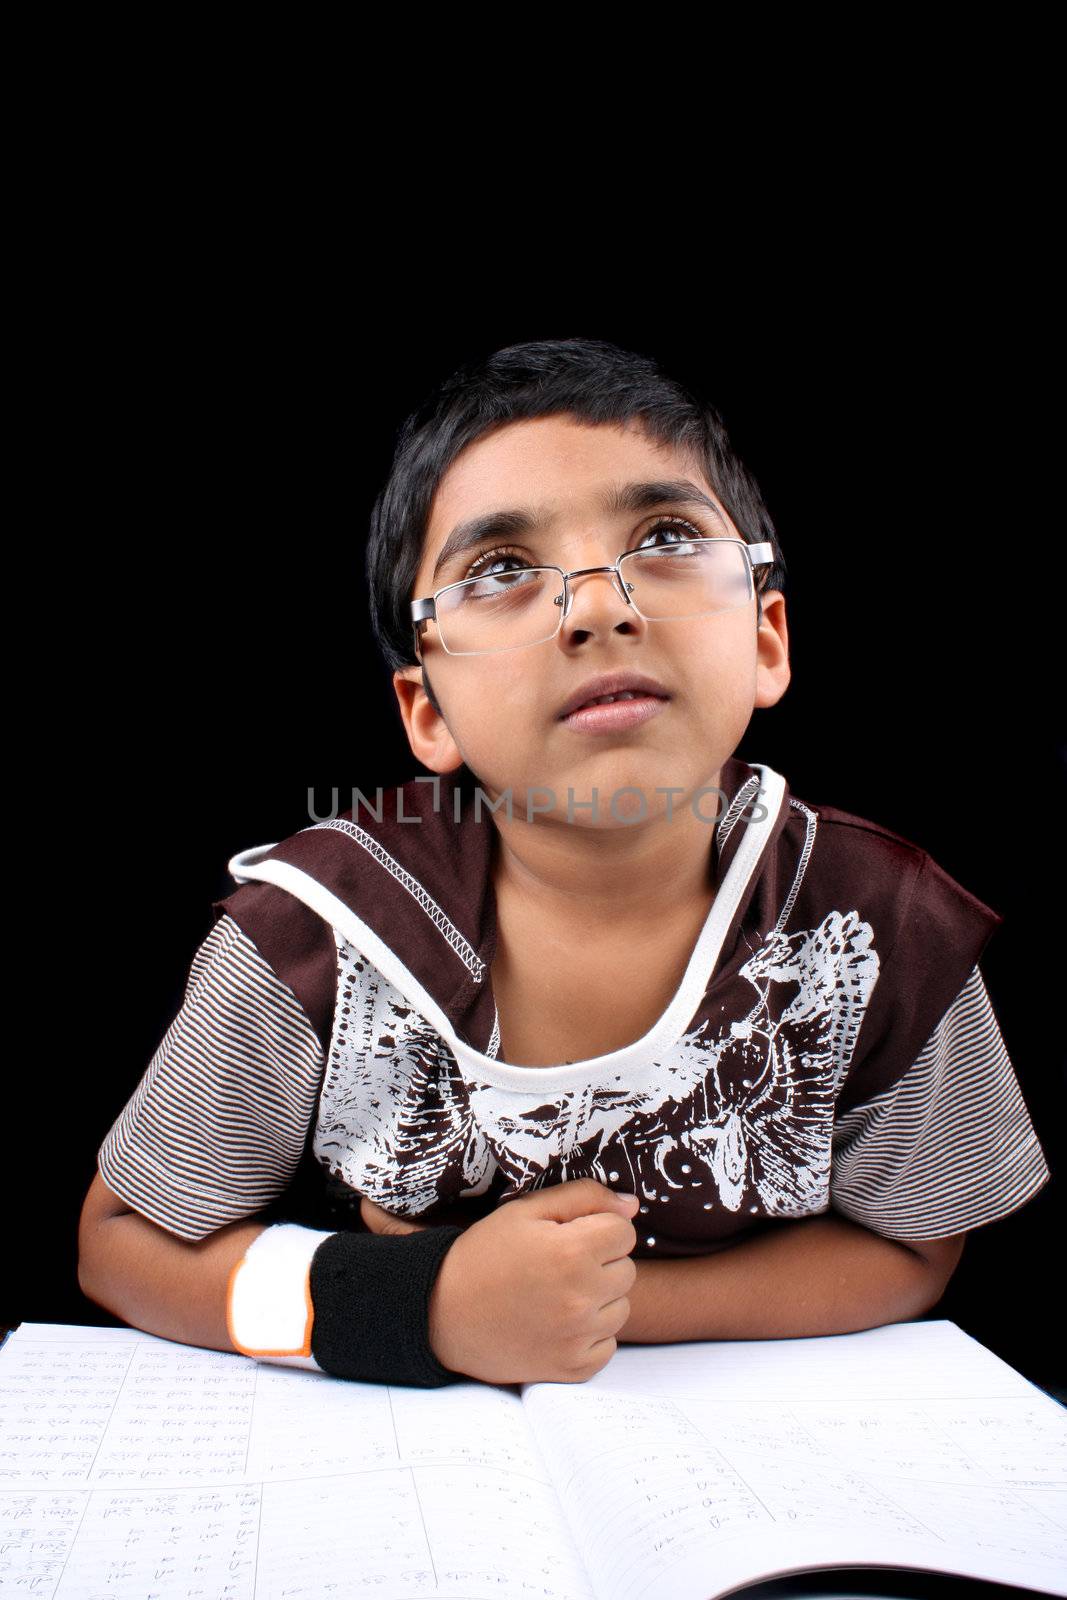 A little Indian boy lost in his dreams while doing his homework studies, on black studio background.